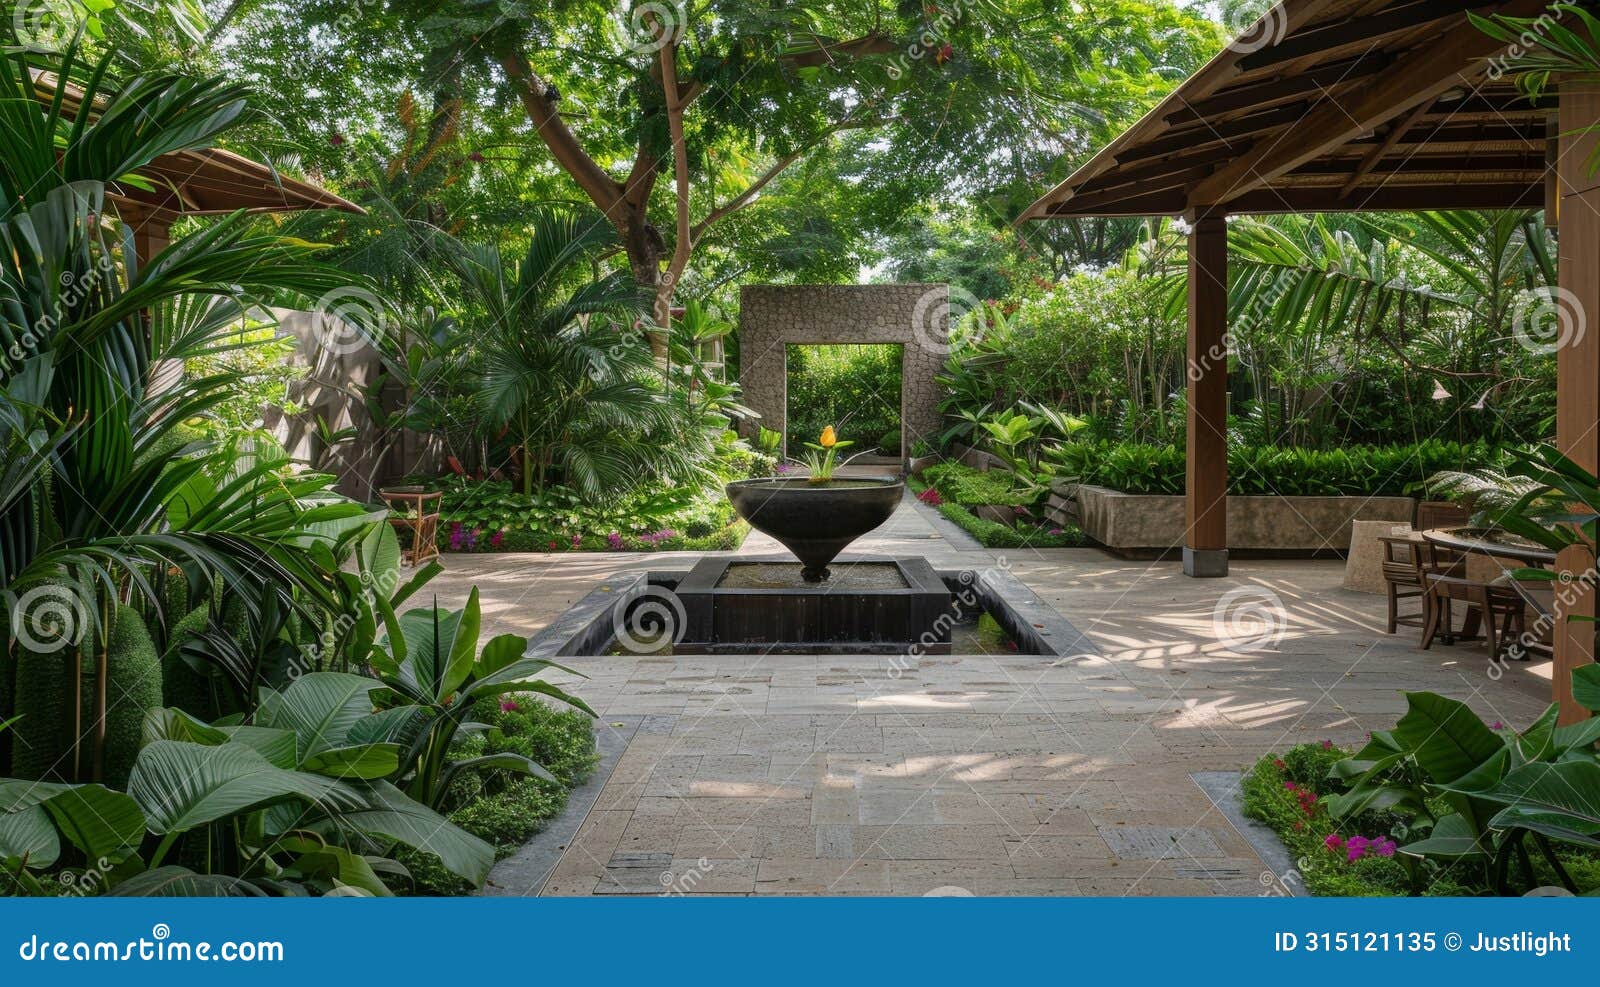 breathe in the rejuvenating scents of our aromatic garden ed to enhance the restful atmosphere of our resort. 2d